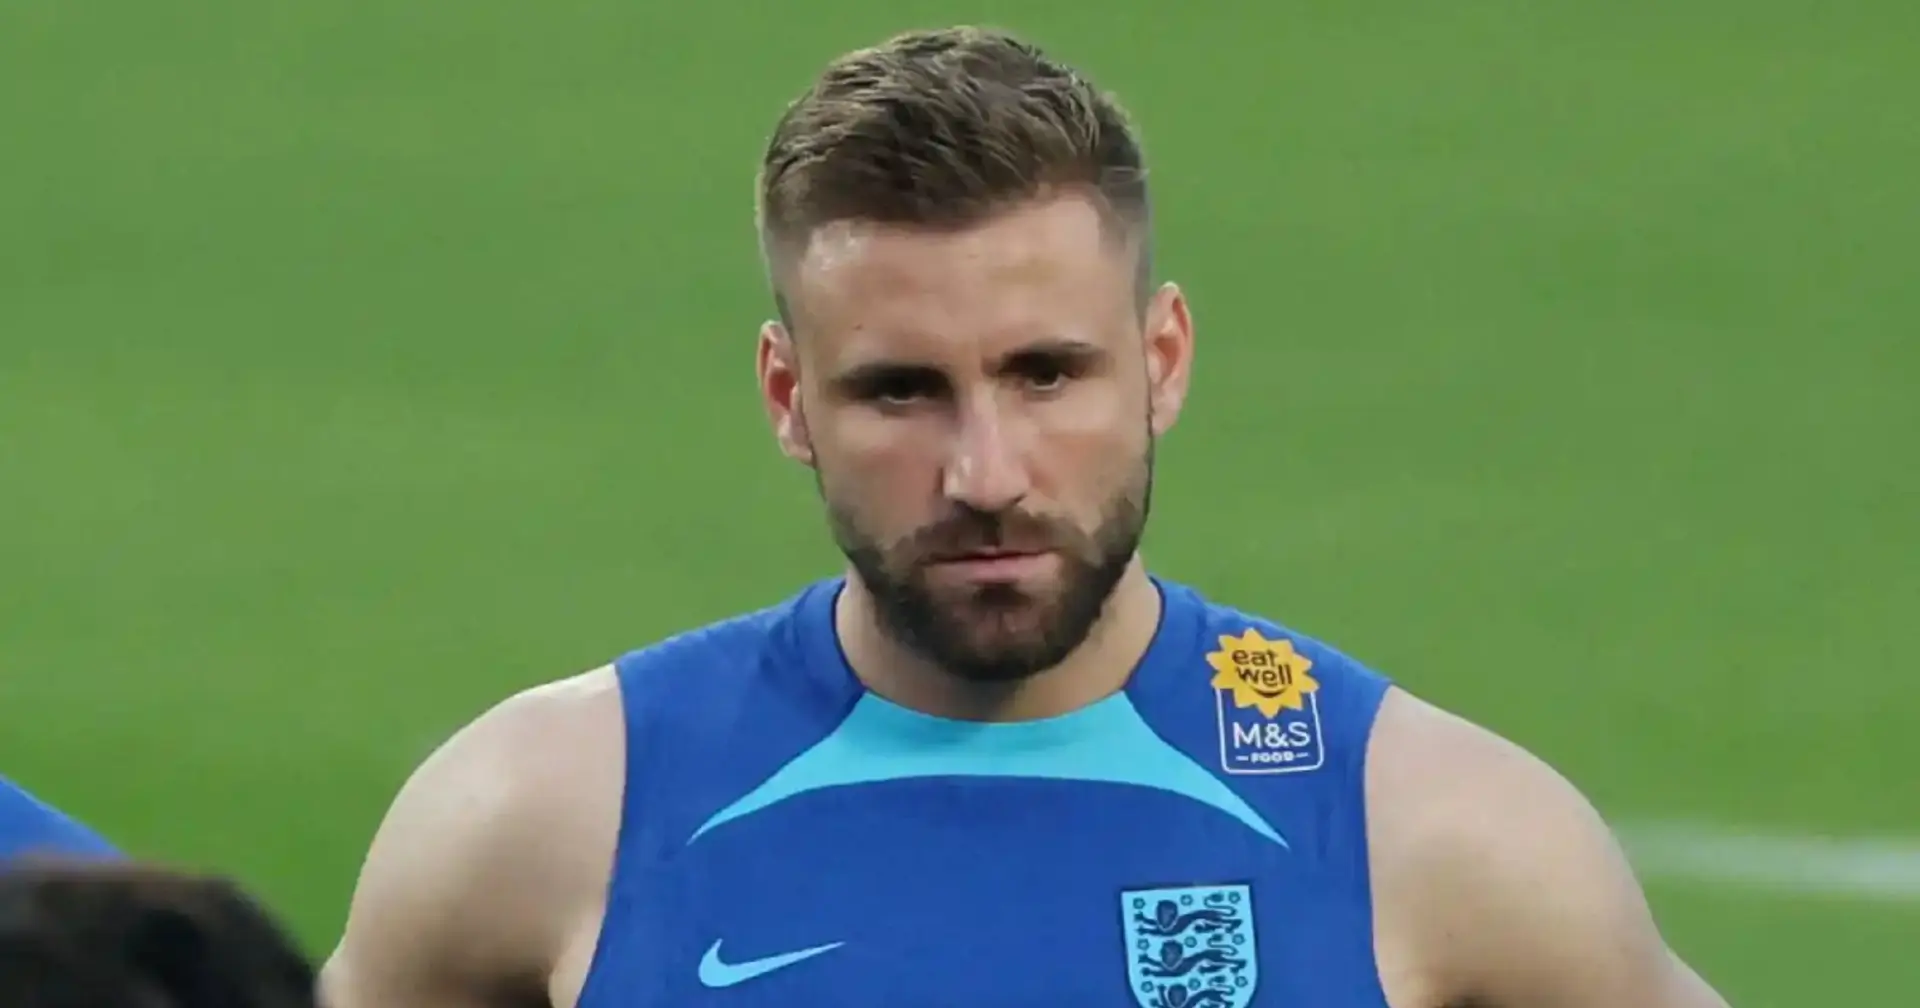 'It is part of my motivation': Luke Shaw reveals personal tragedy he suffered just before World Cup